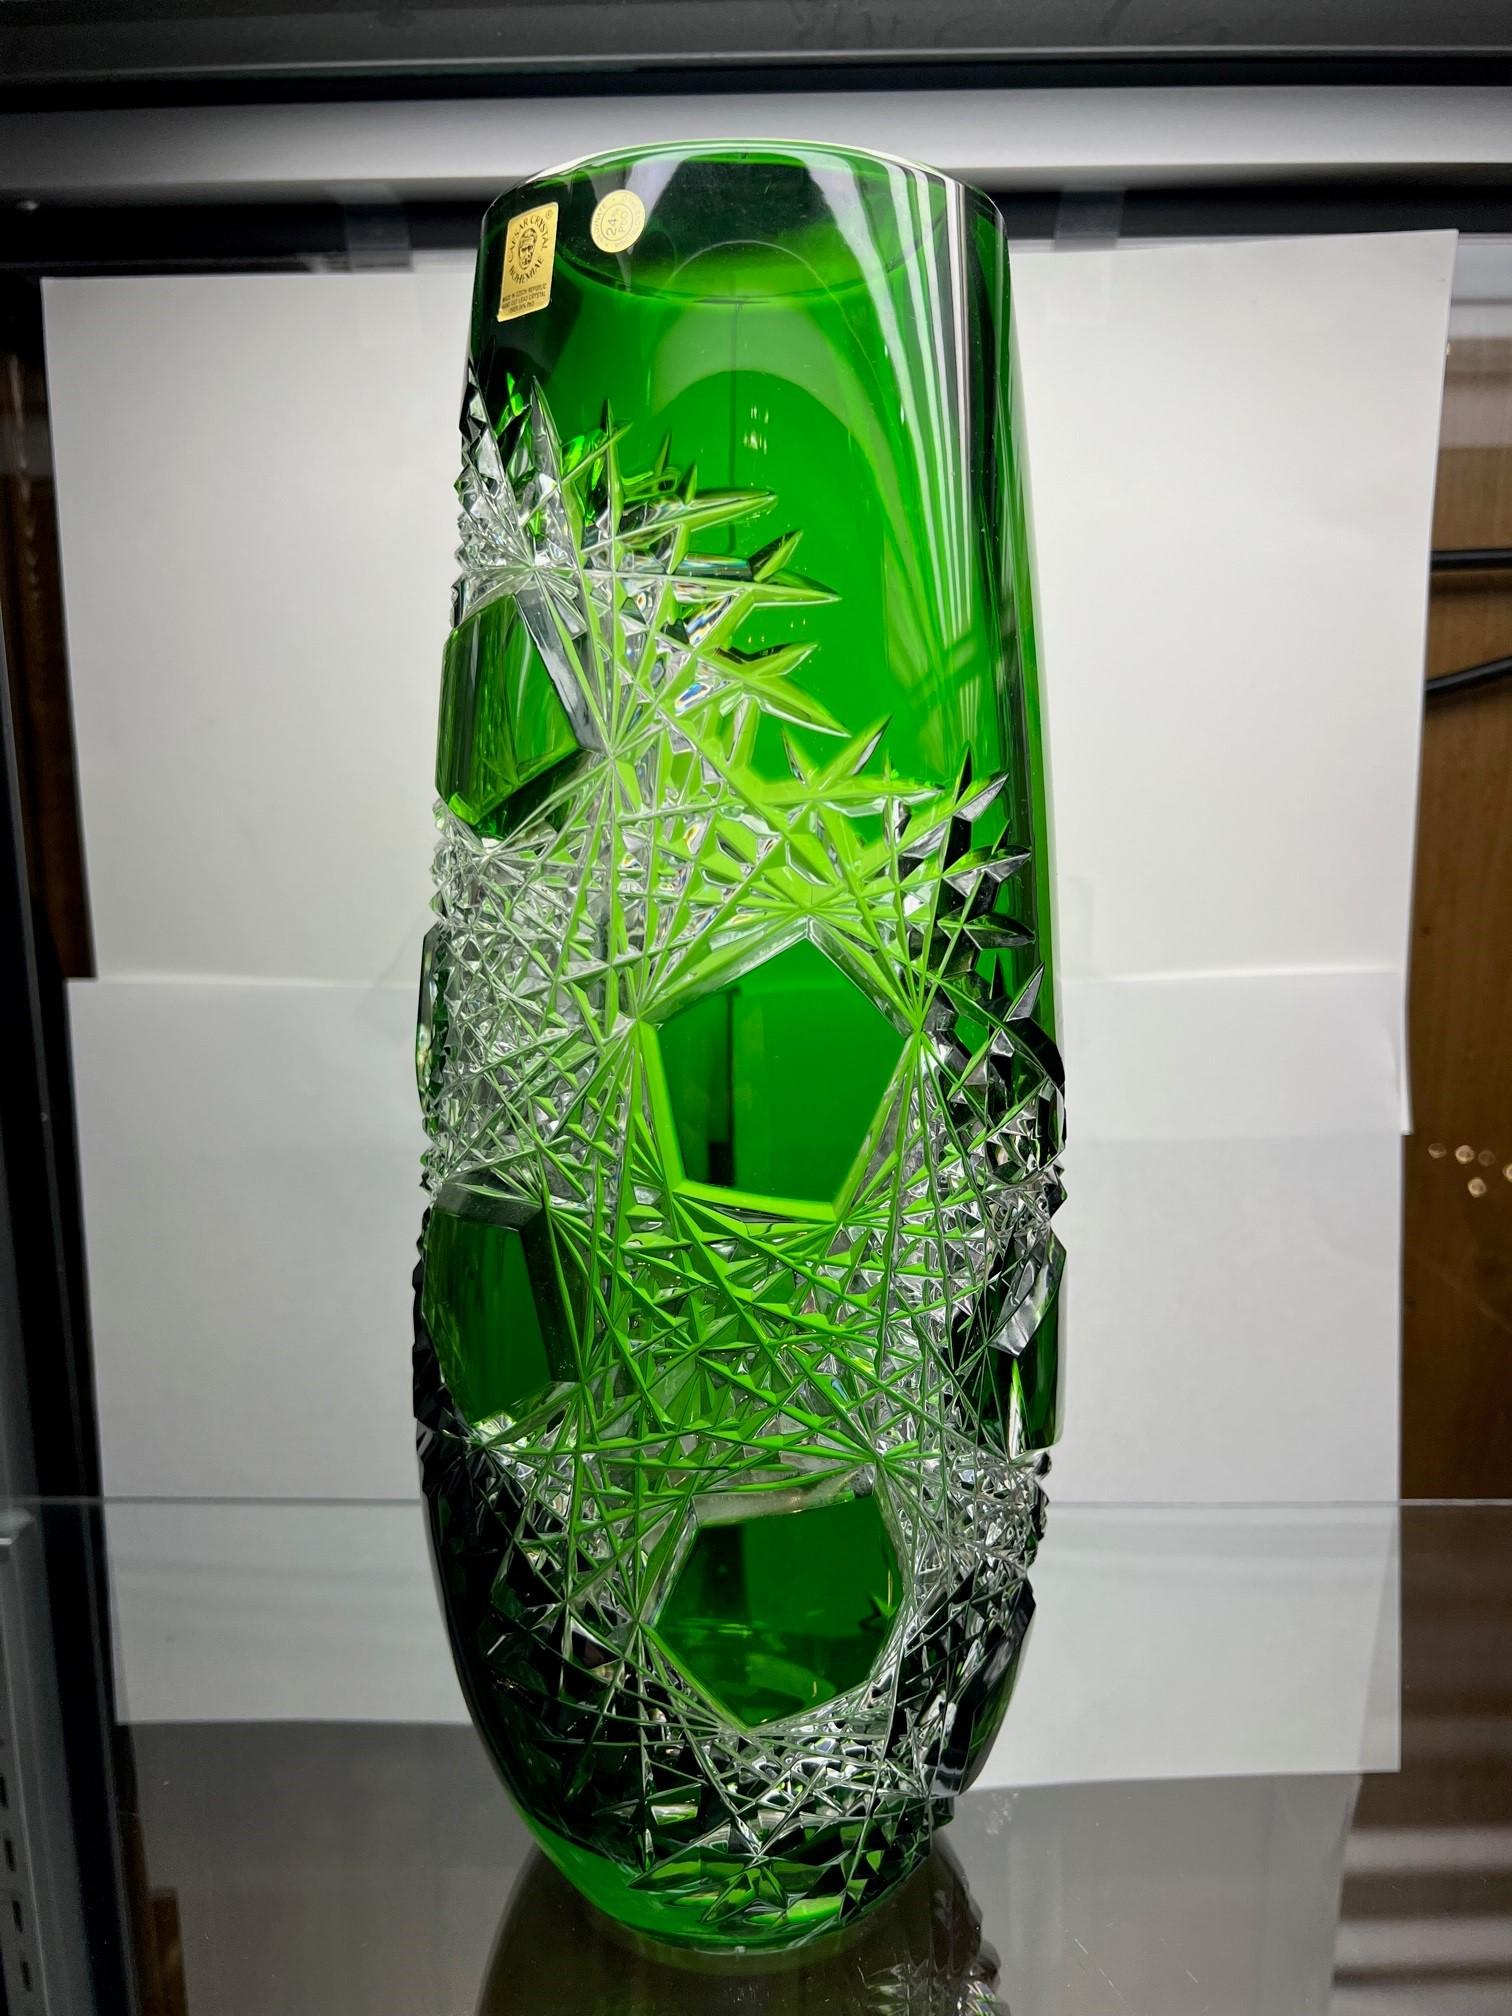 Stunning hand cut lead crystal vase created as a work of art by the hands of the finest Czech glass workers. The Caesar Crystal Company in the Czech Republic has been selling hand cut lead crystal pieces since 1861 and is known as one of the finest